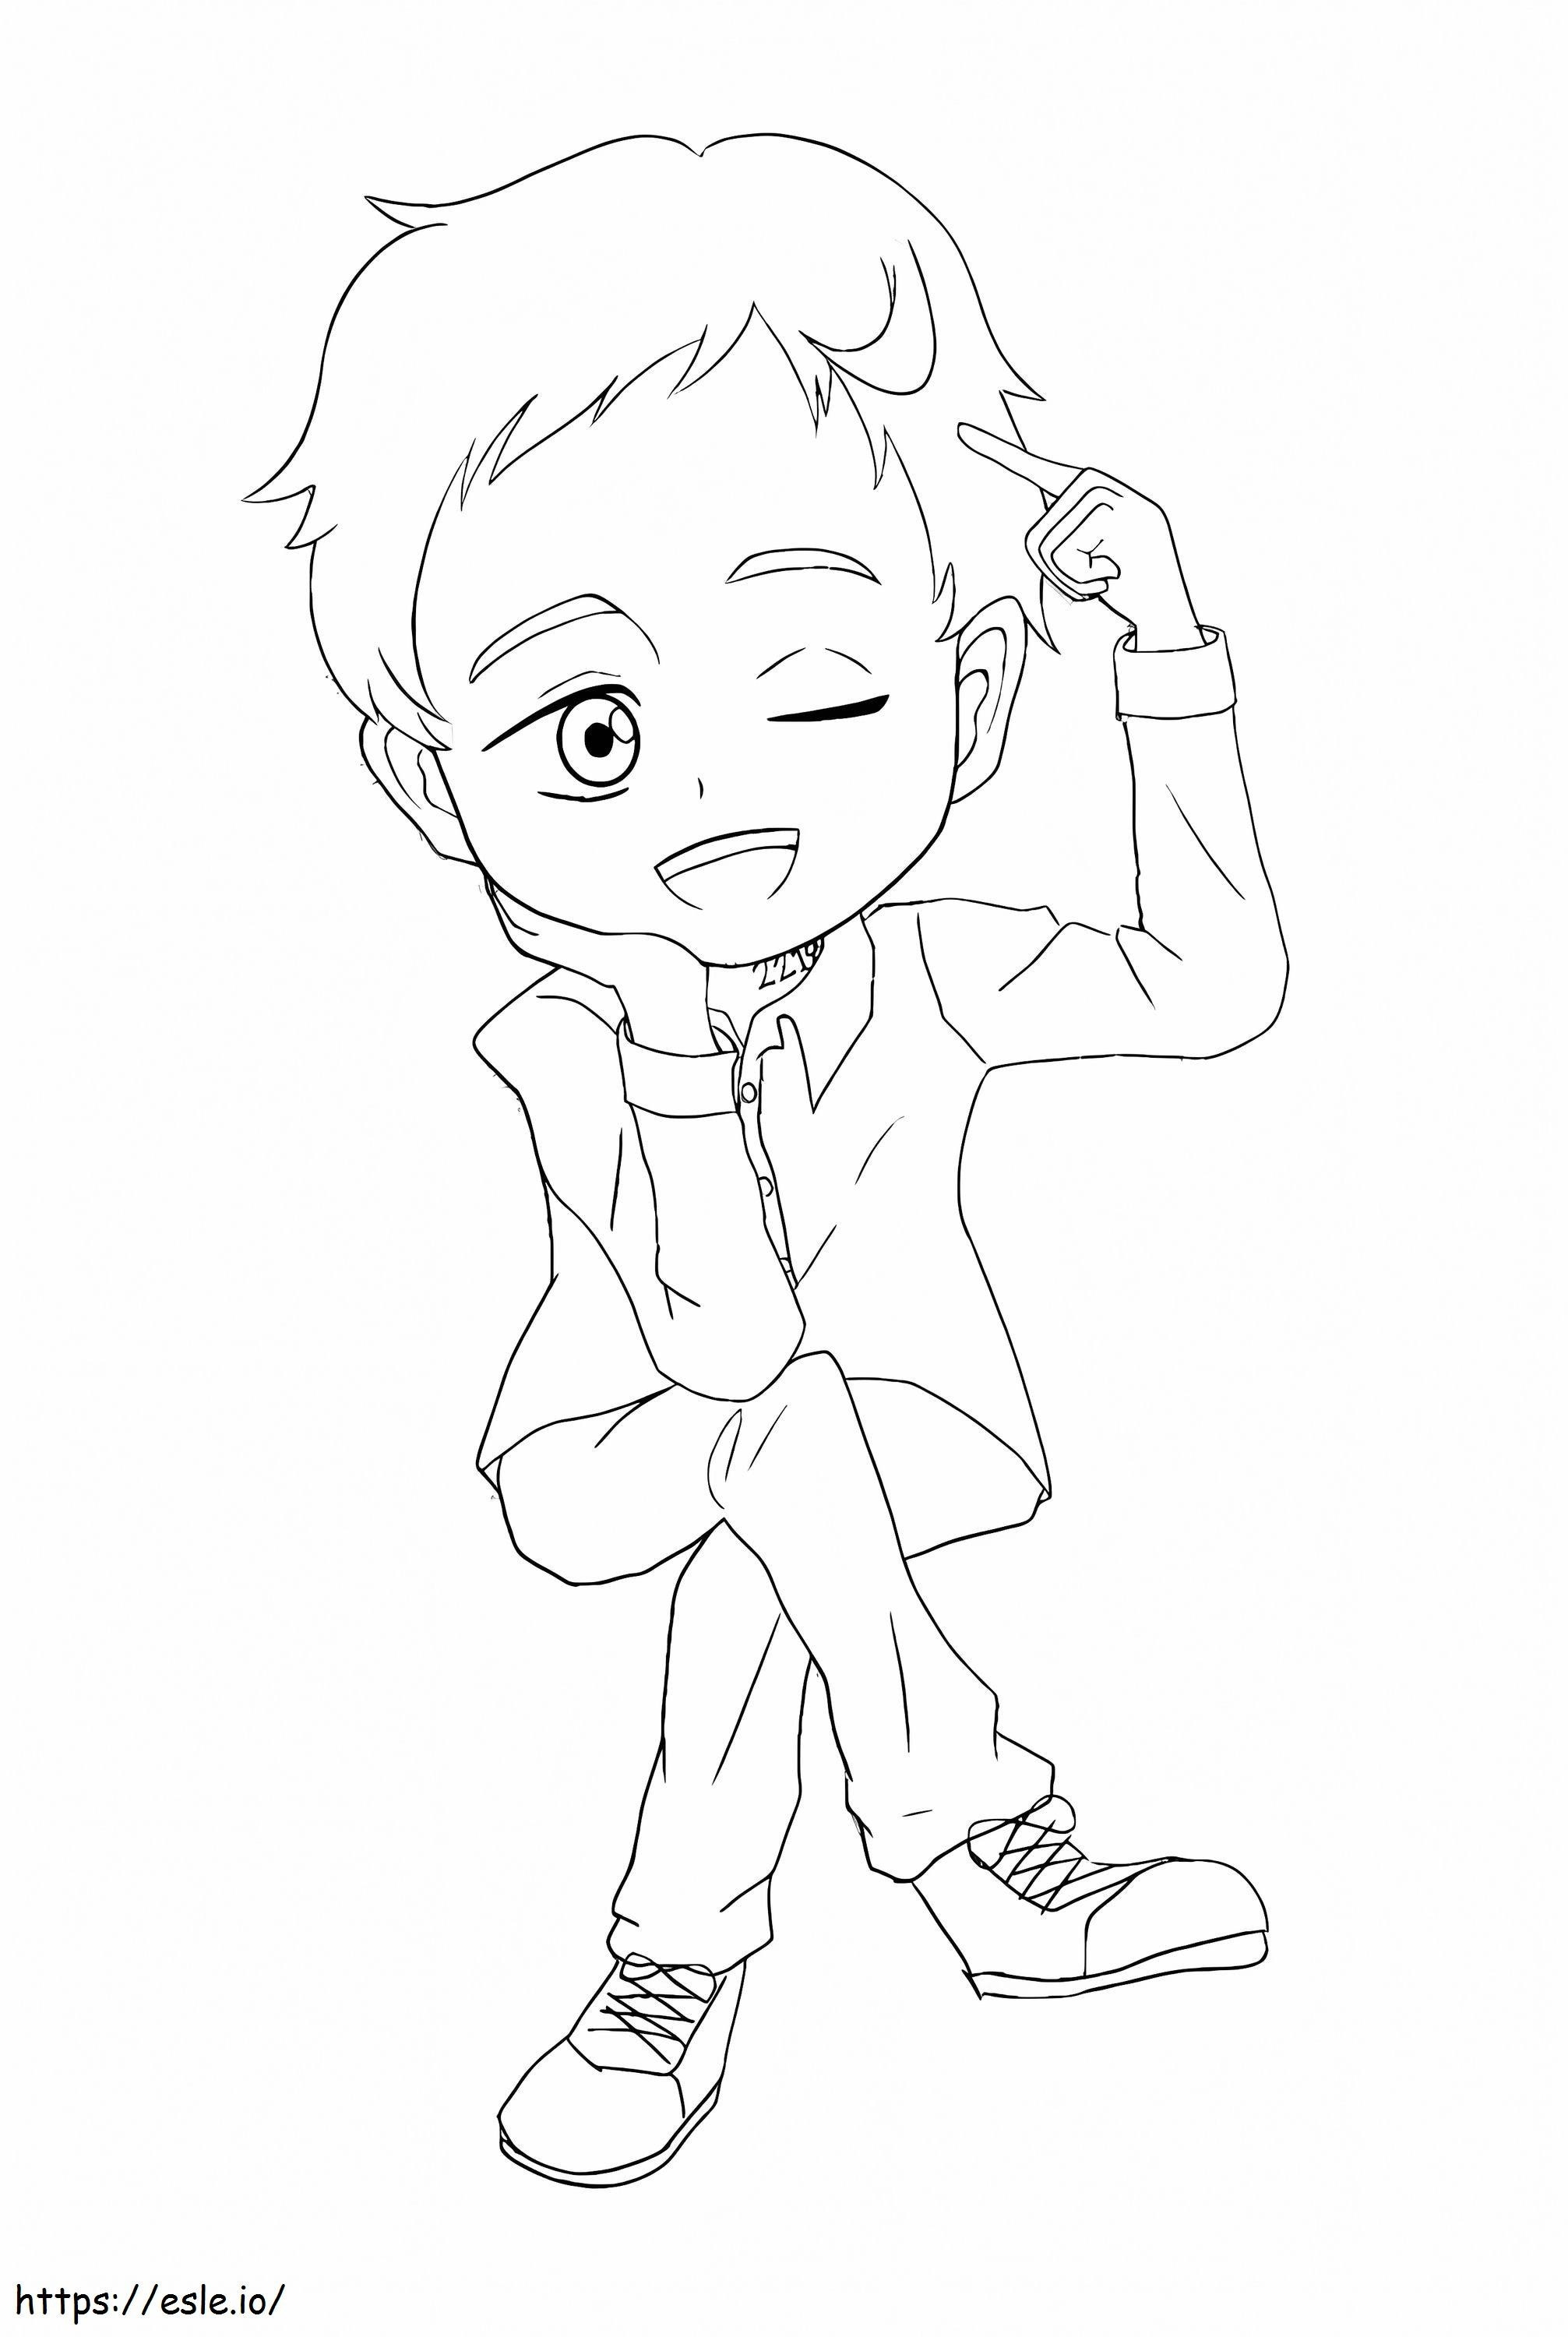 Chibi Norman coloring page